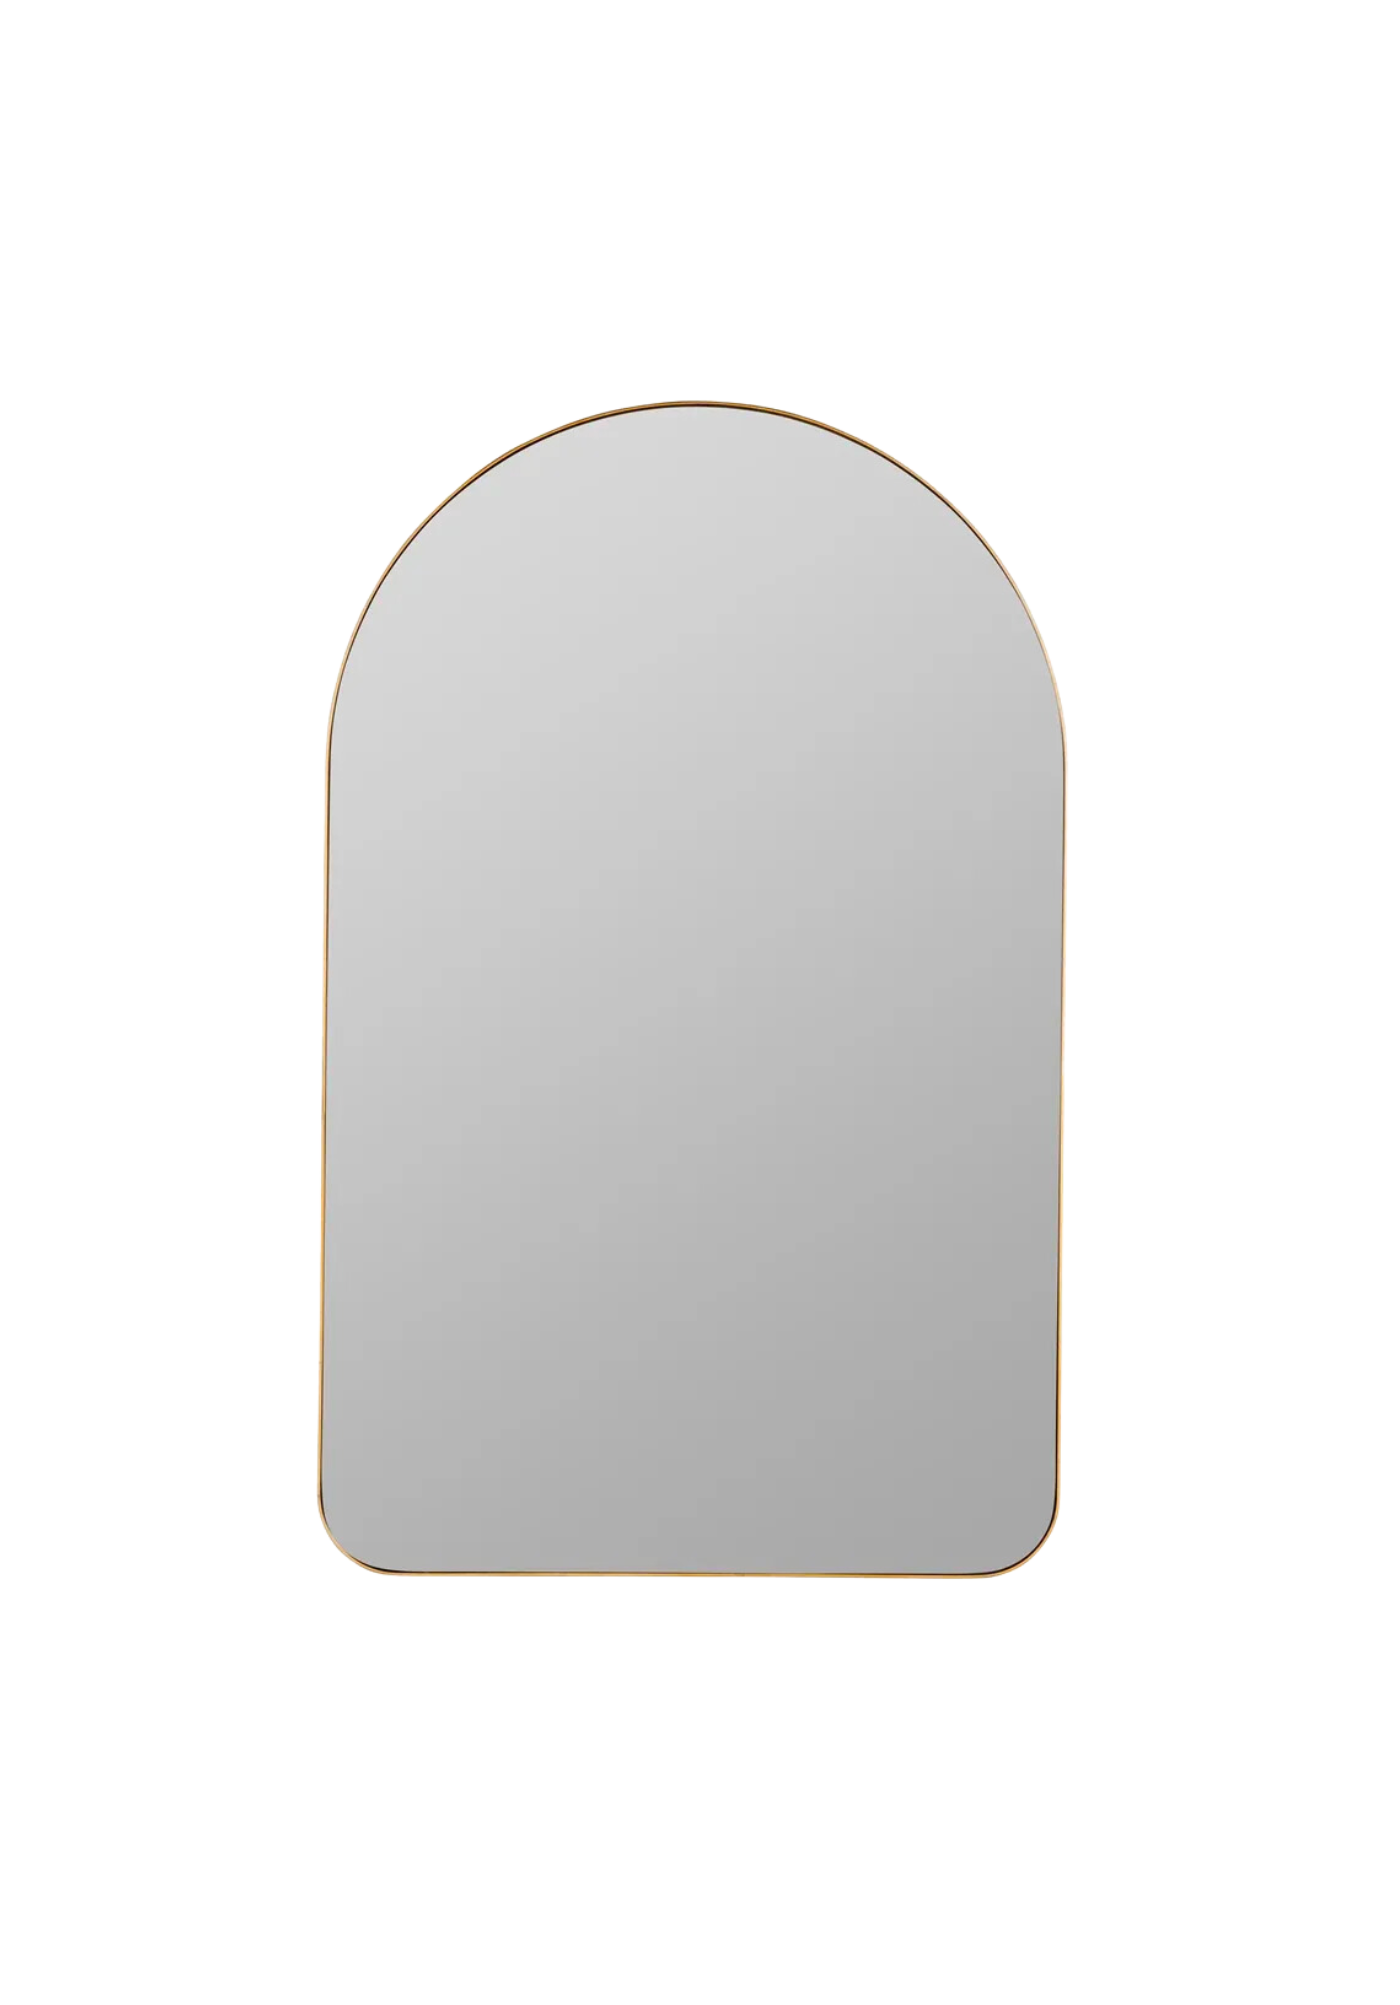 Classic Rounded Arch Mirror